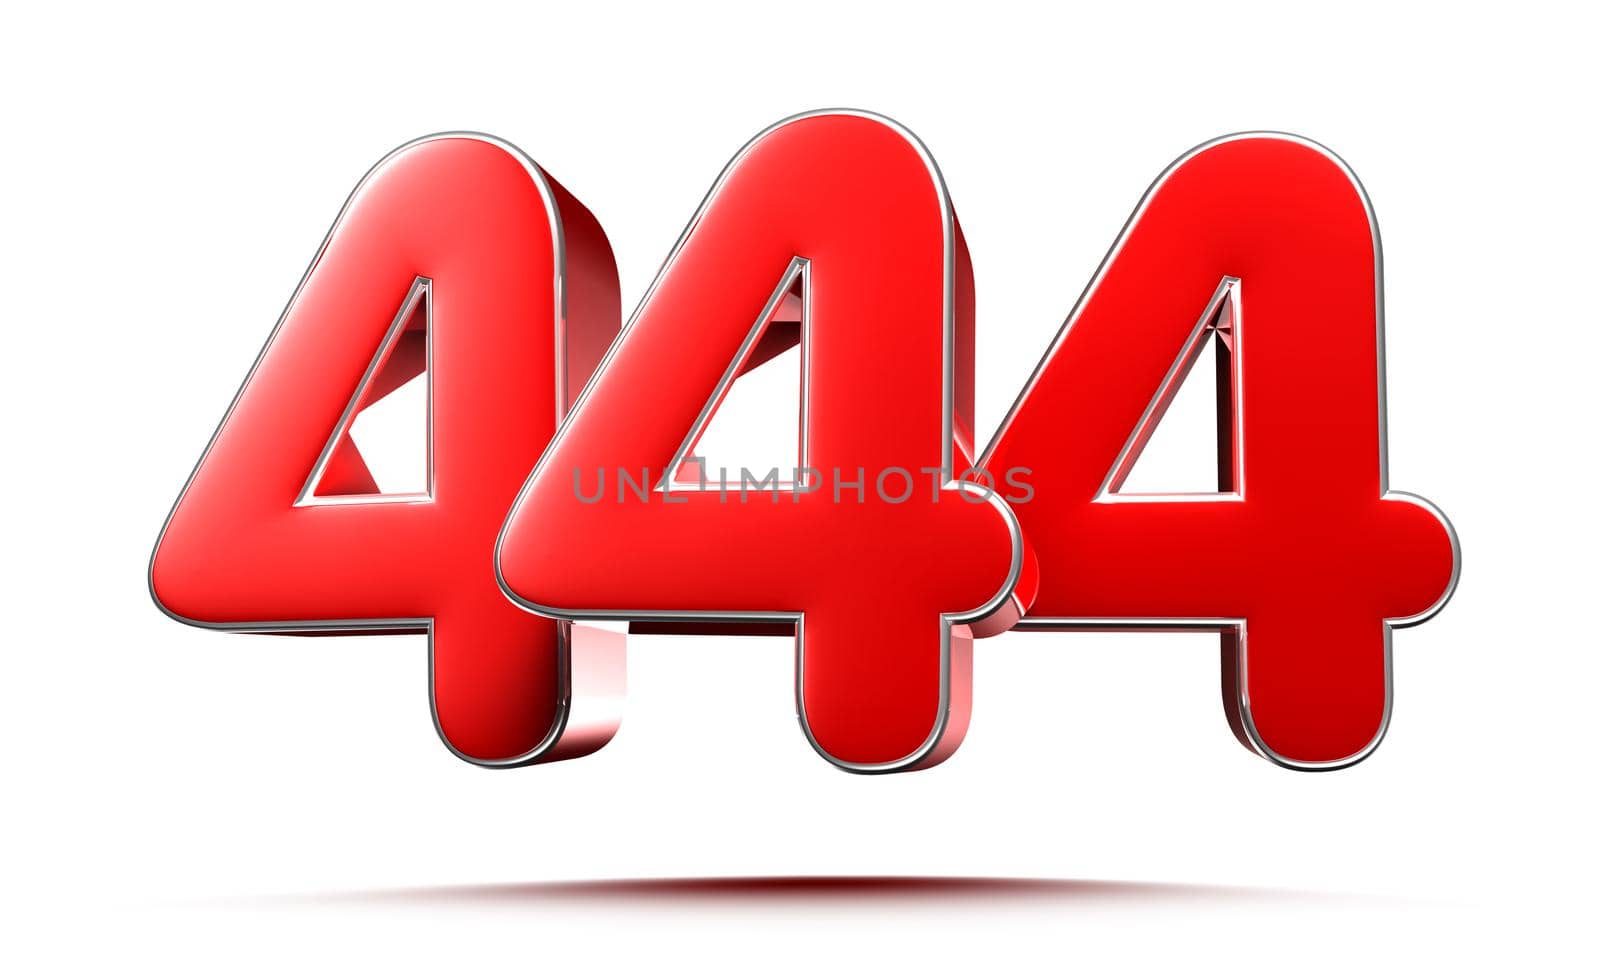 Rounded red numbers 444 on white background 3D illustration with clipping path by thitimontoyai